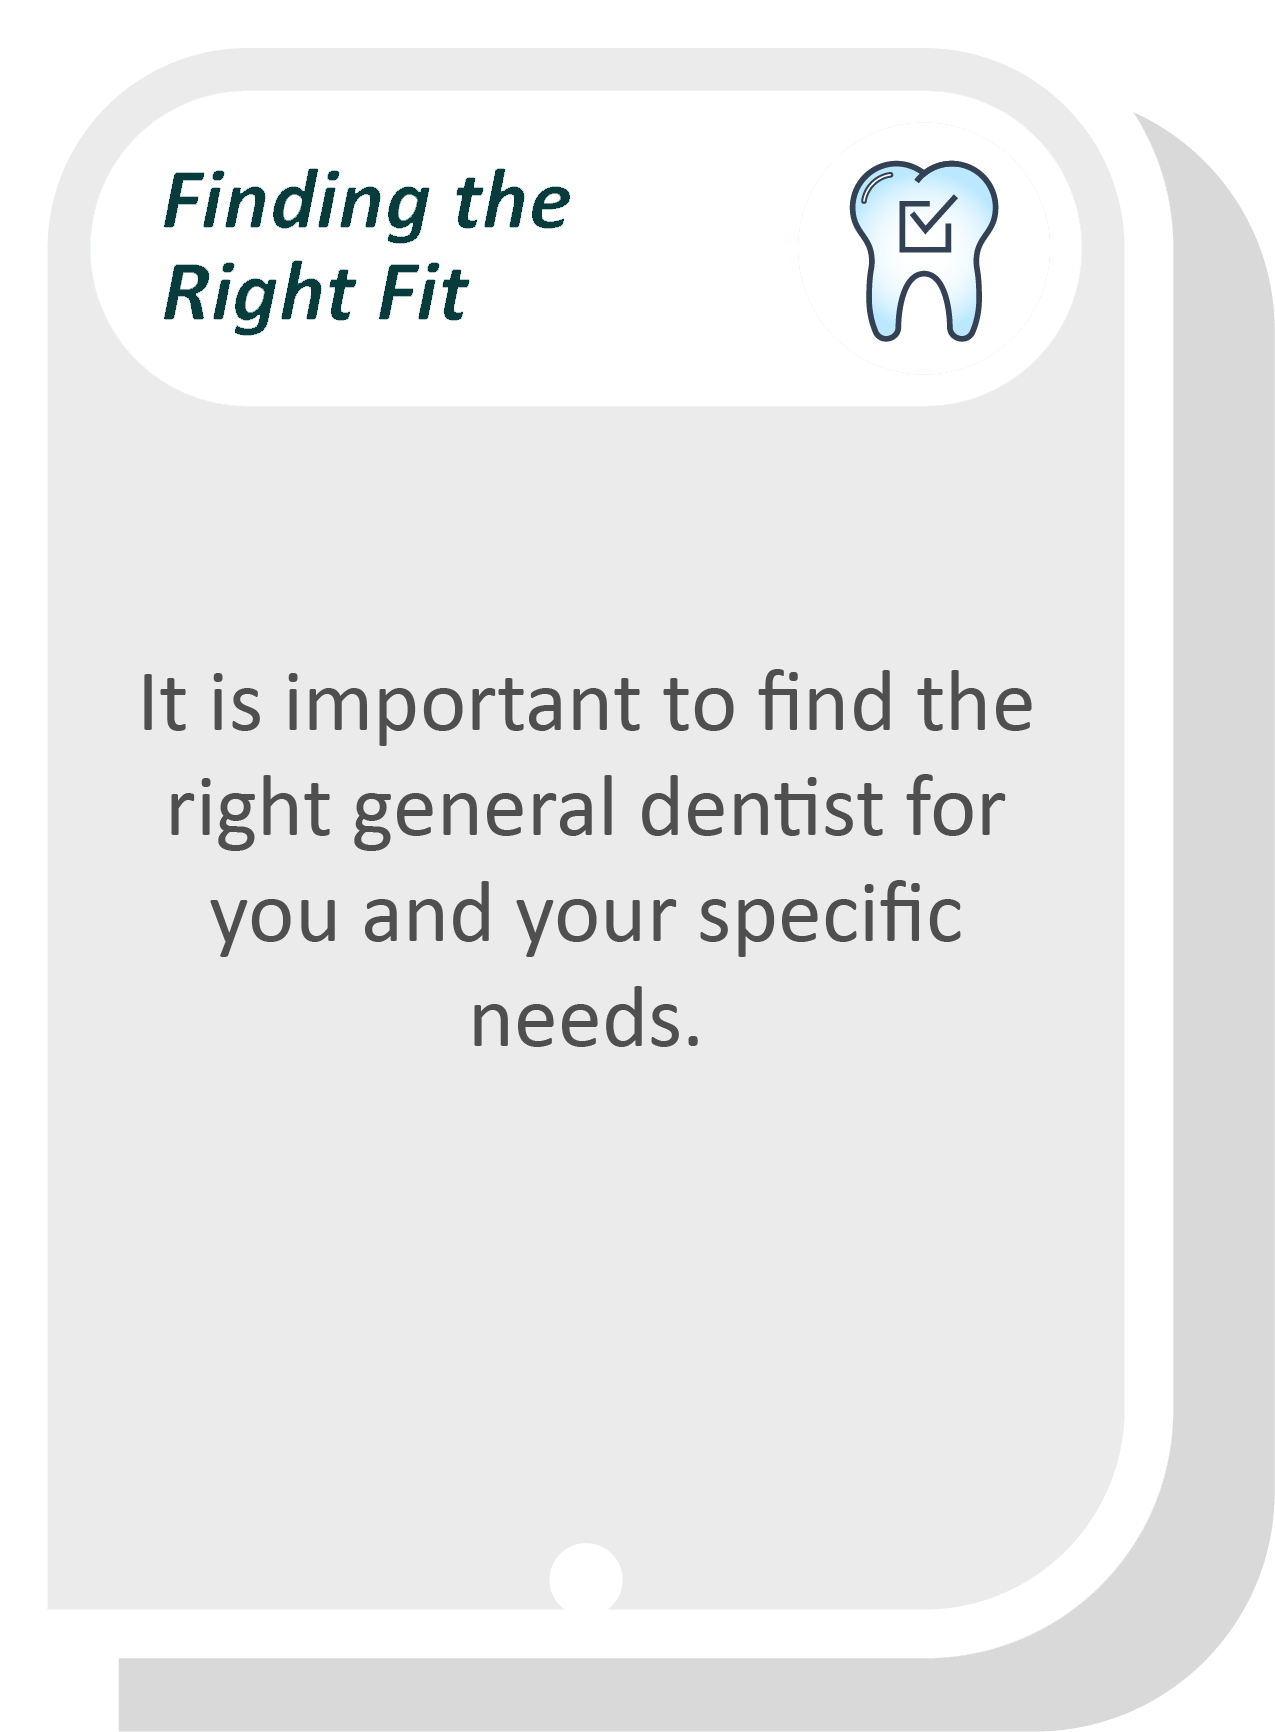 General dentist infographic: It is important to find the right general dentist for you and your specific needs.